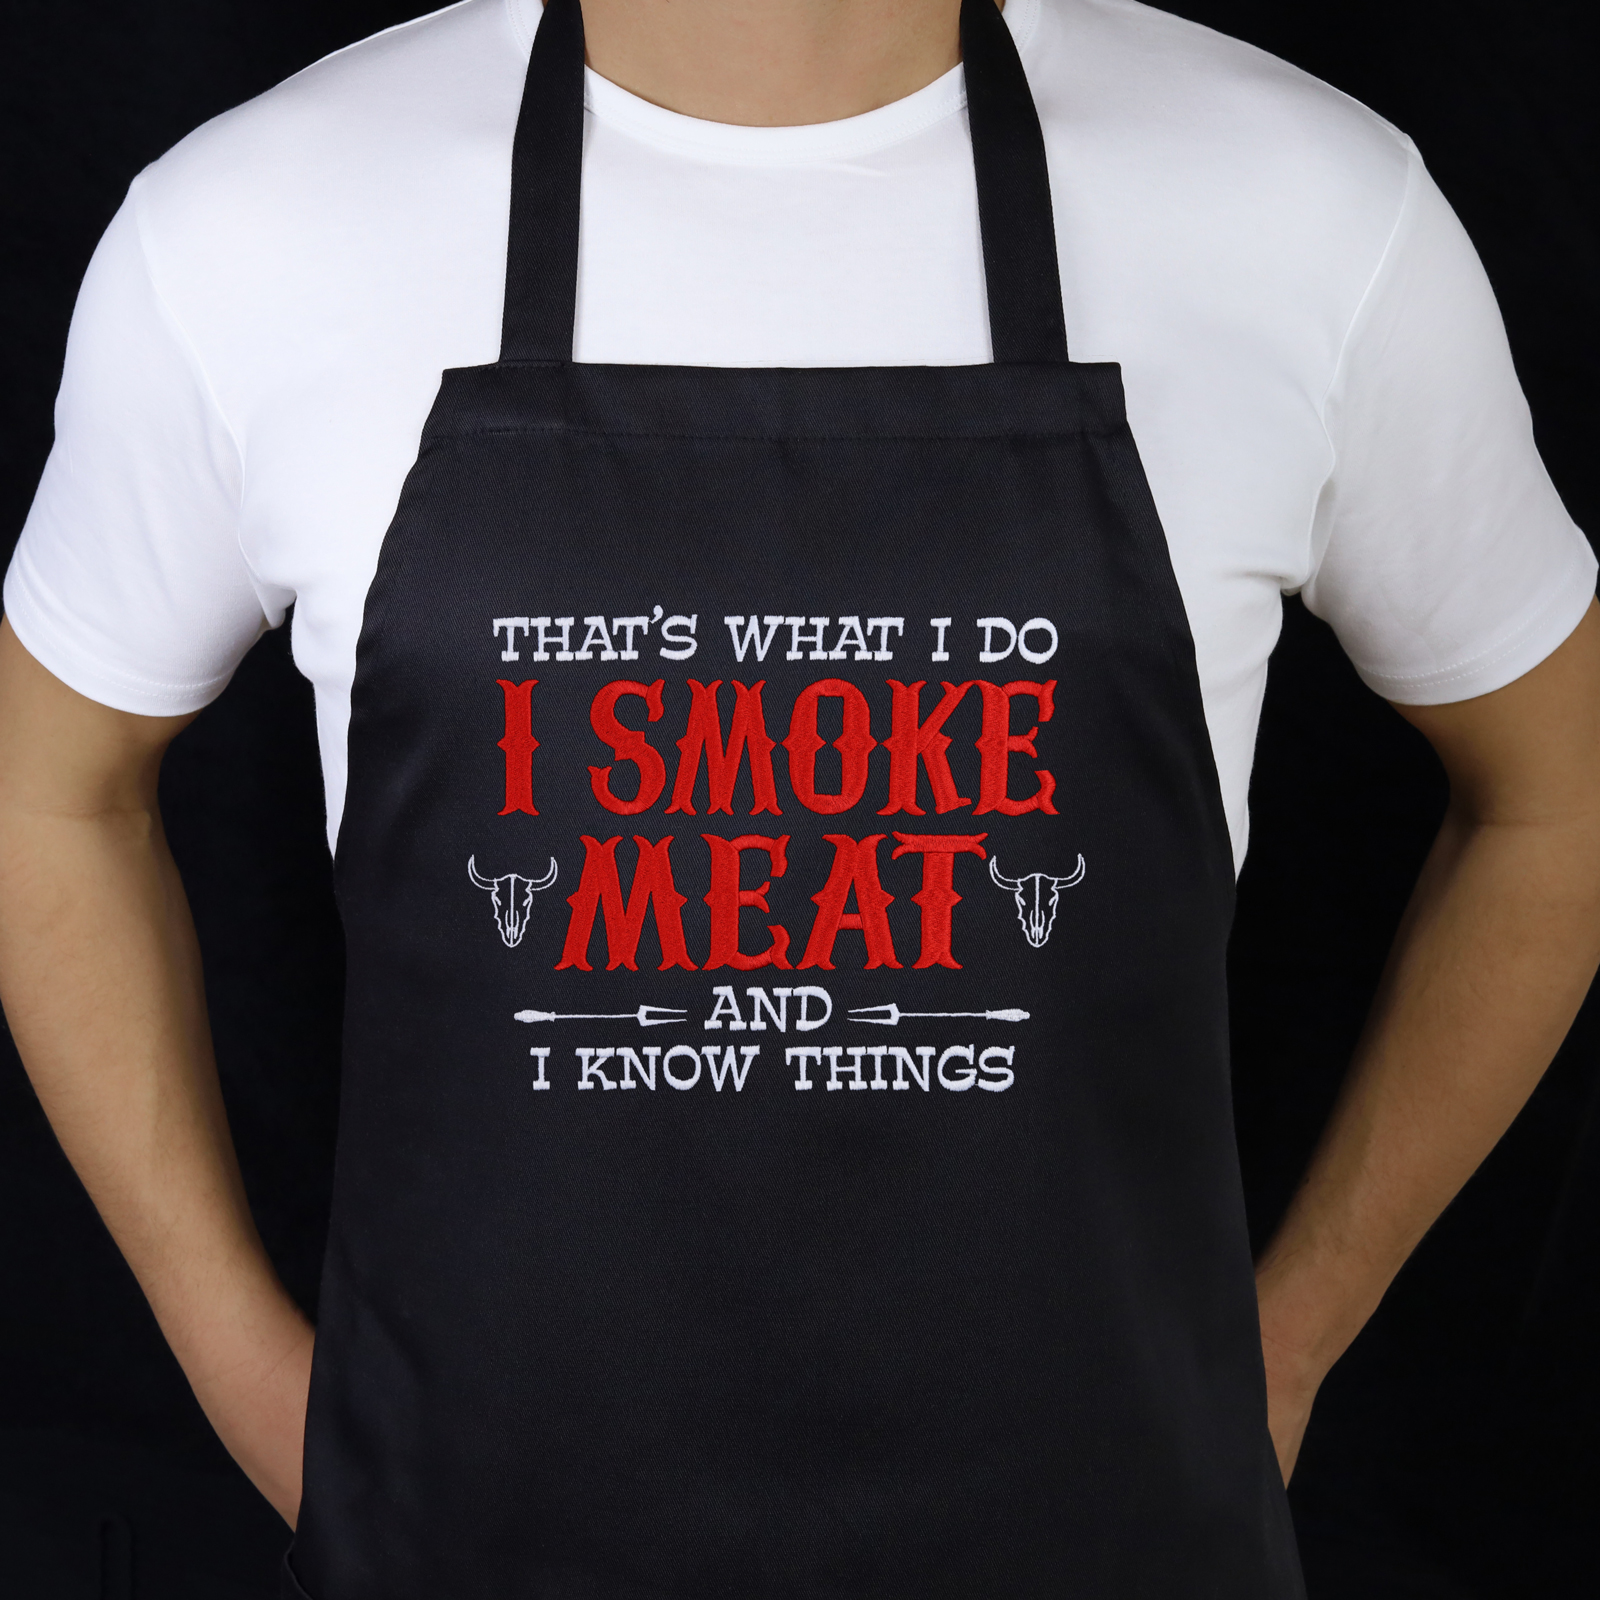 That's what I do - I smoke meat - and I know things - Grillschürze